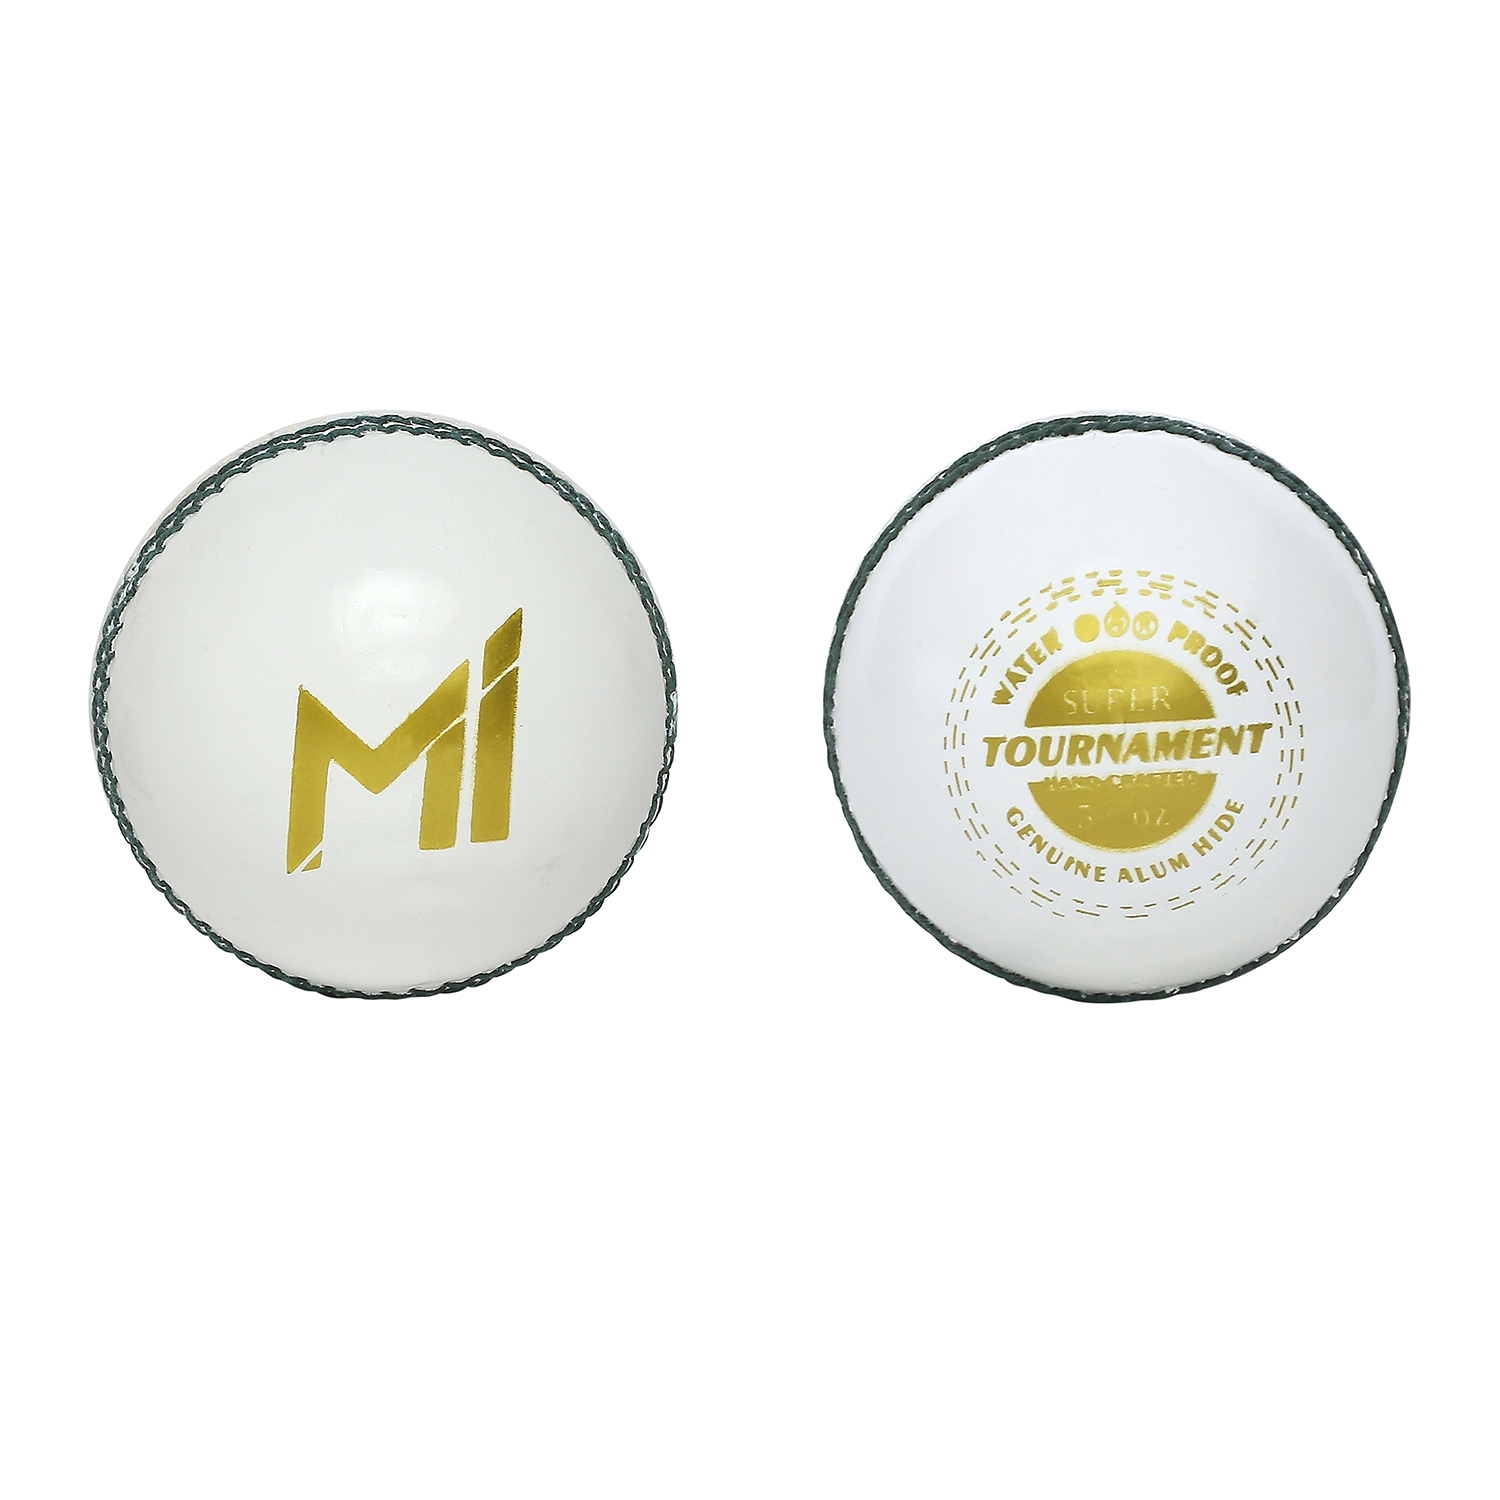 playR | MI: Super Tournament Leather Ball (White) Pack of 2